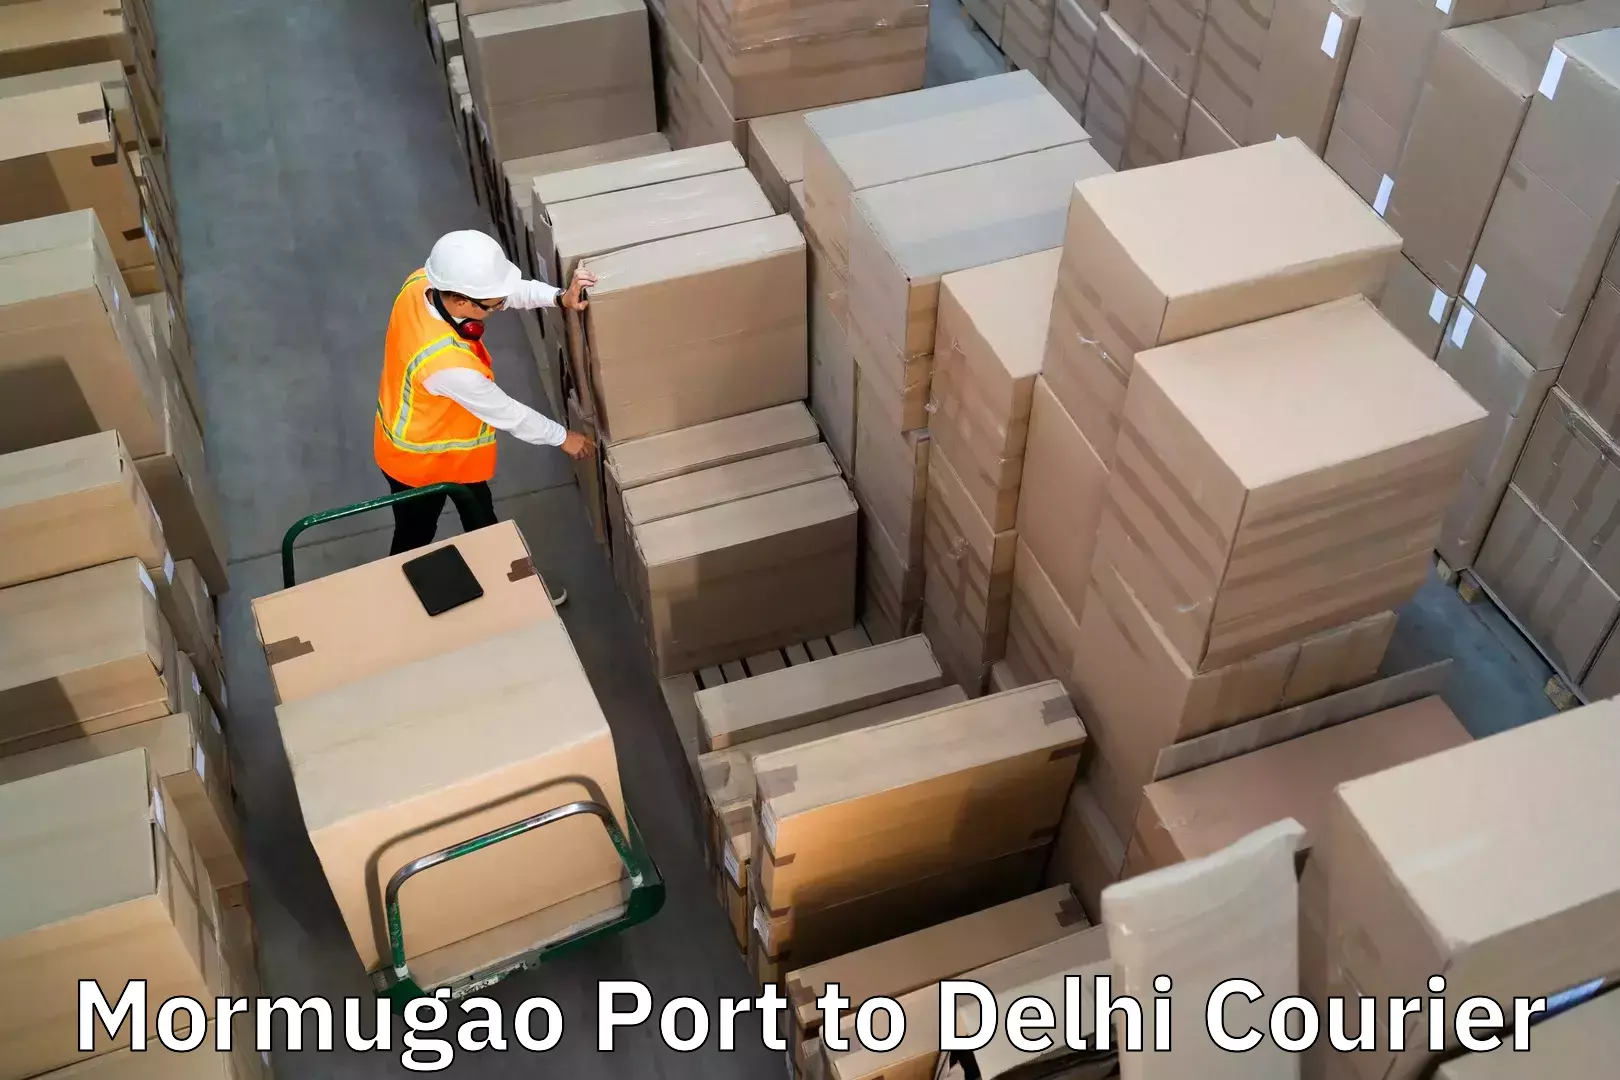 Luggage transport consulting in Mormugao Port to Delhi